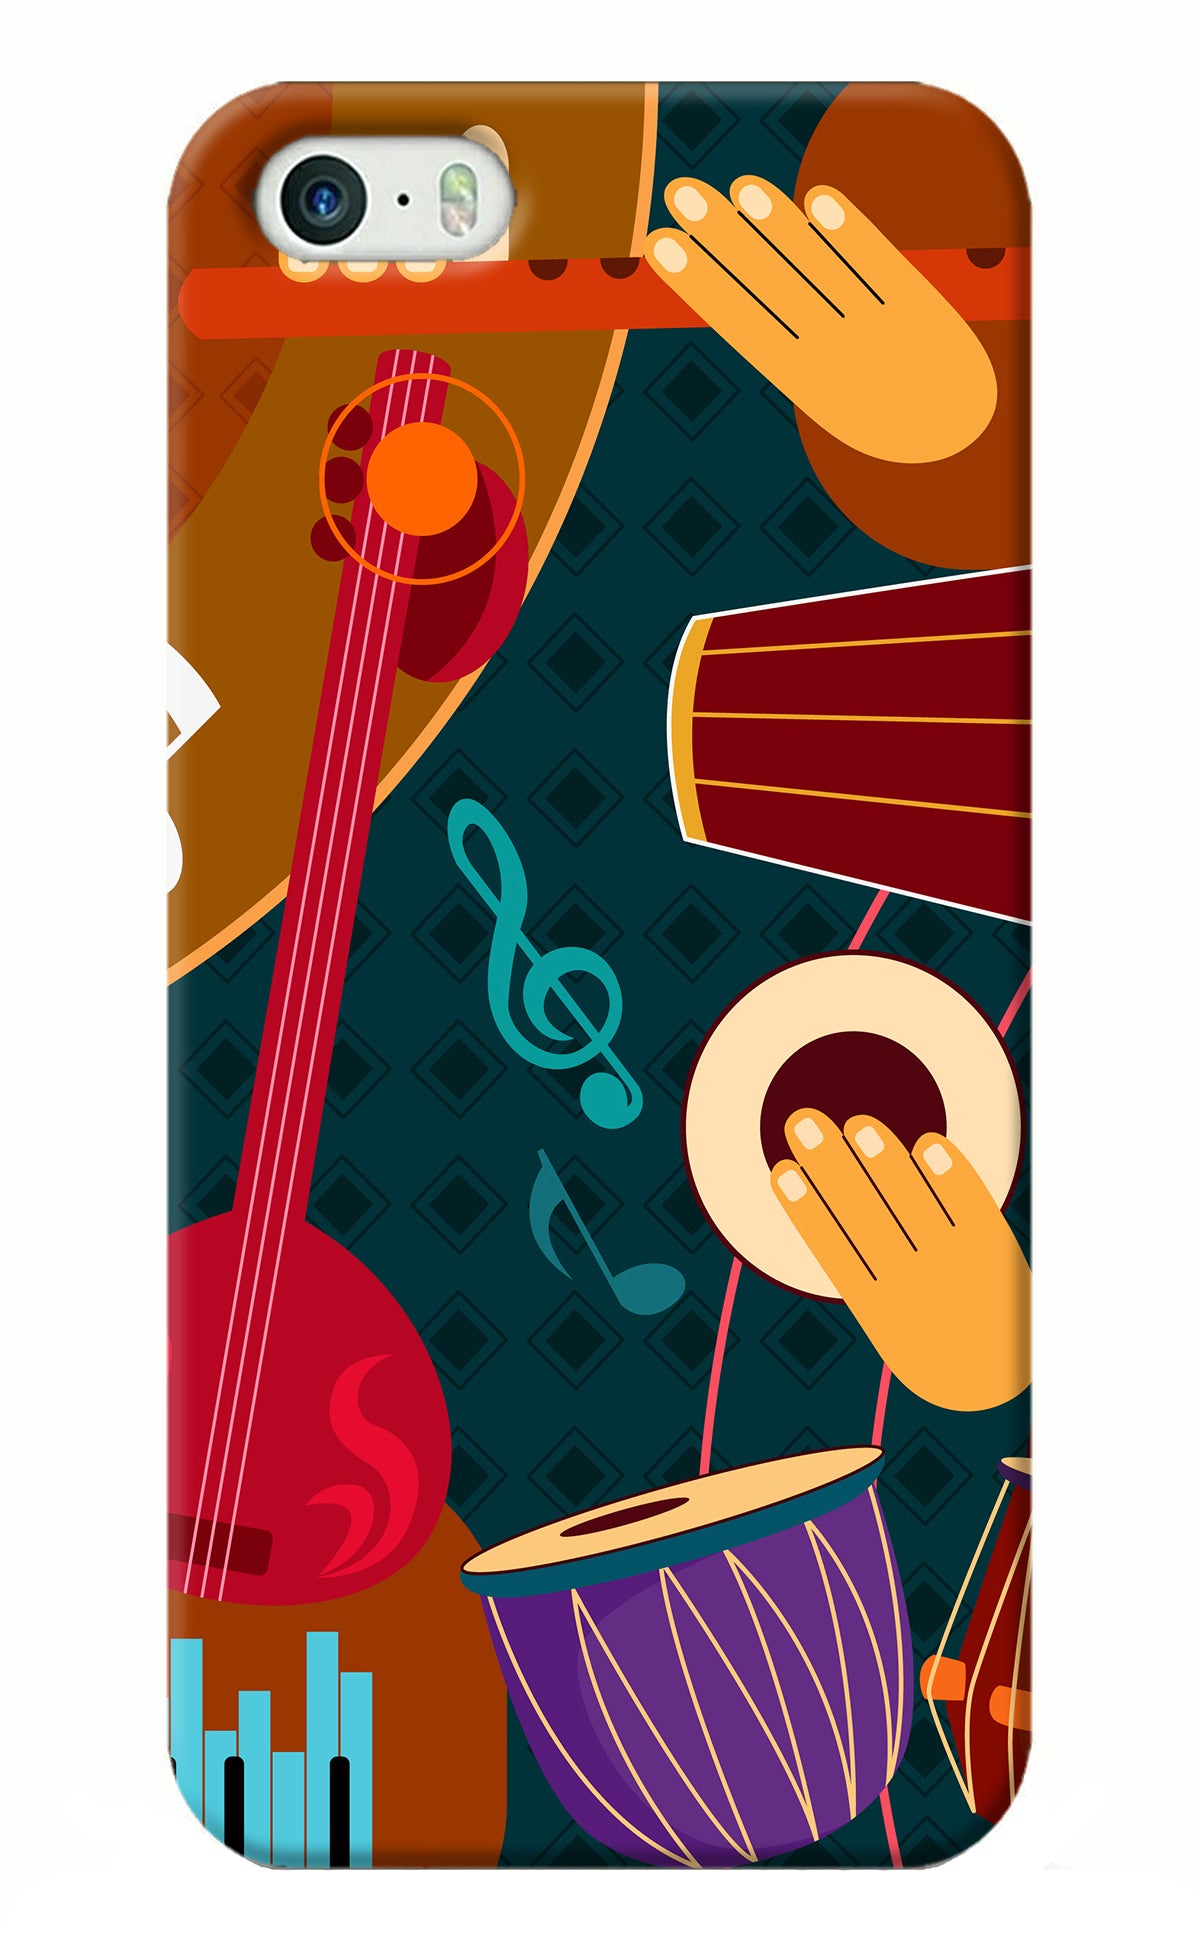 Music Instrument iPhone 5/5s Back Cover